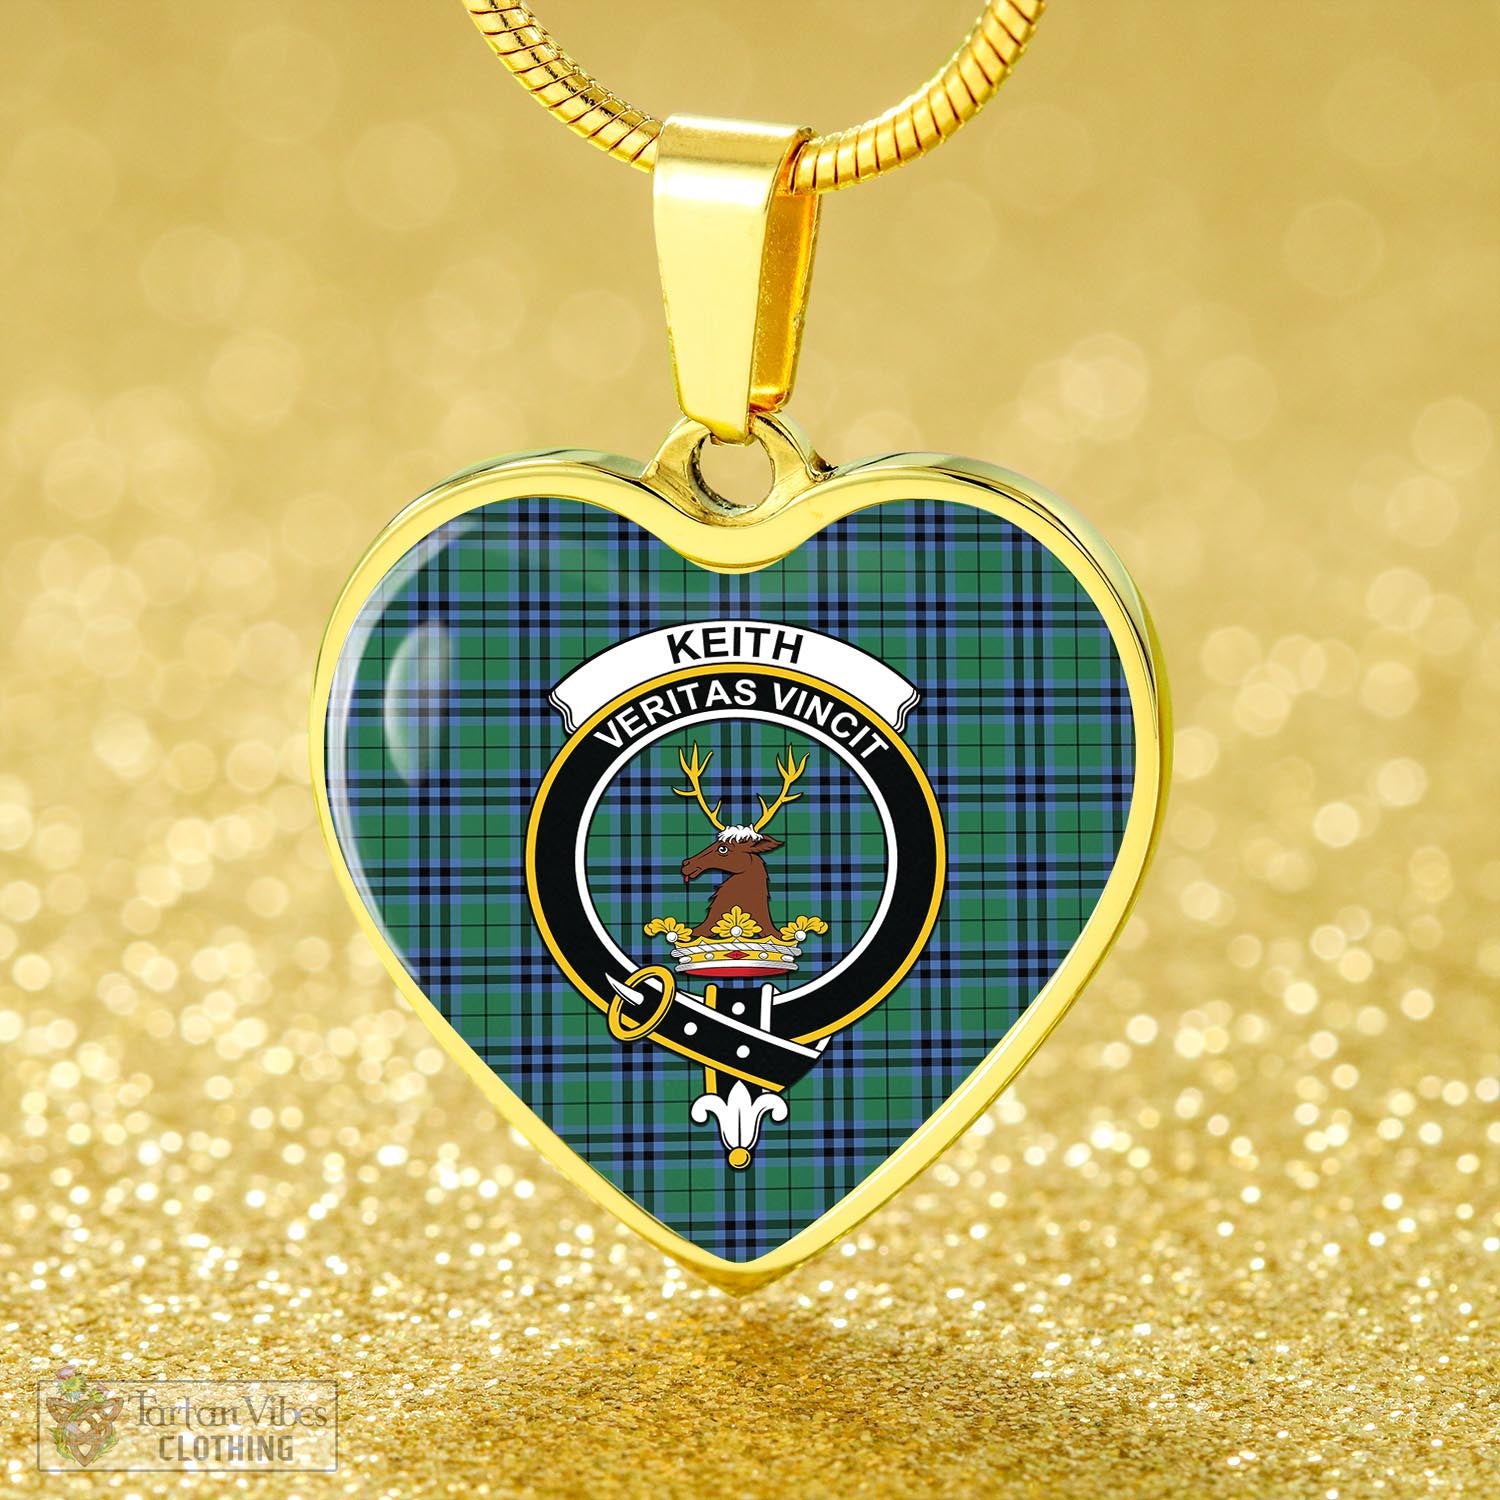 Tartan Vibes Clothing Keith Ancient Tartan Heart Necklace with Family Crest